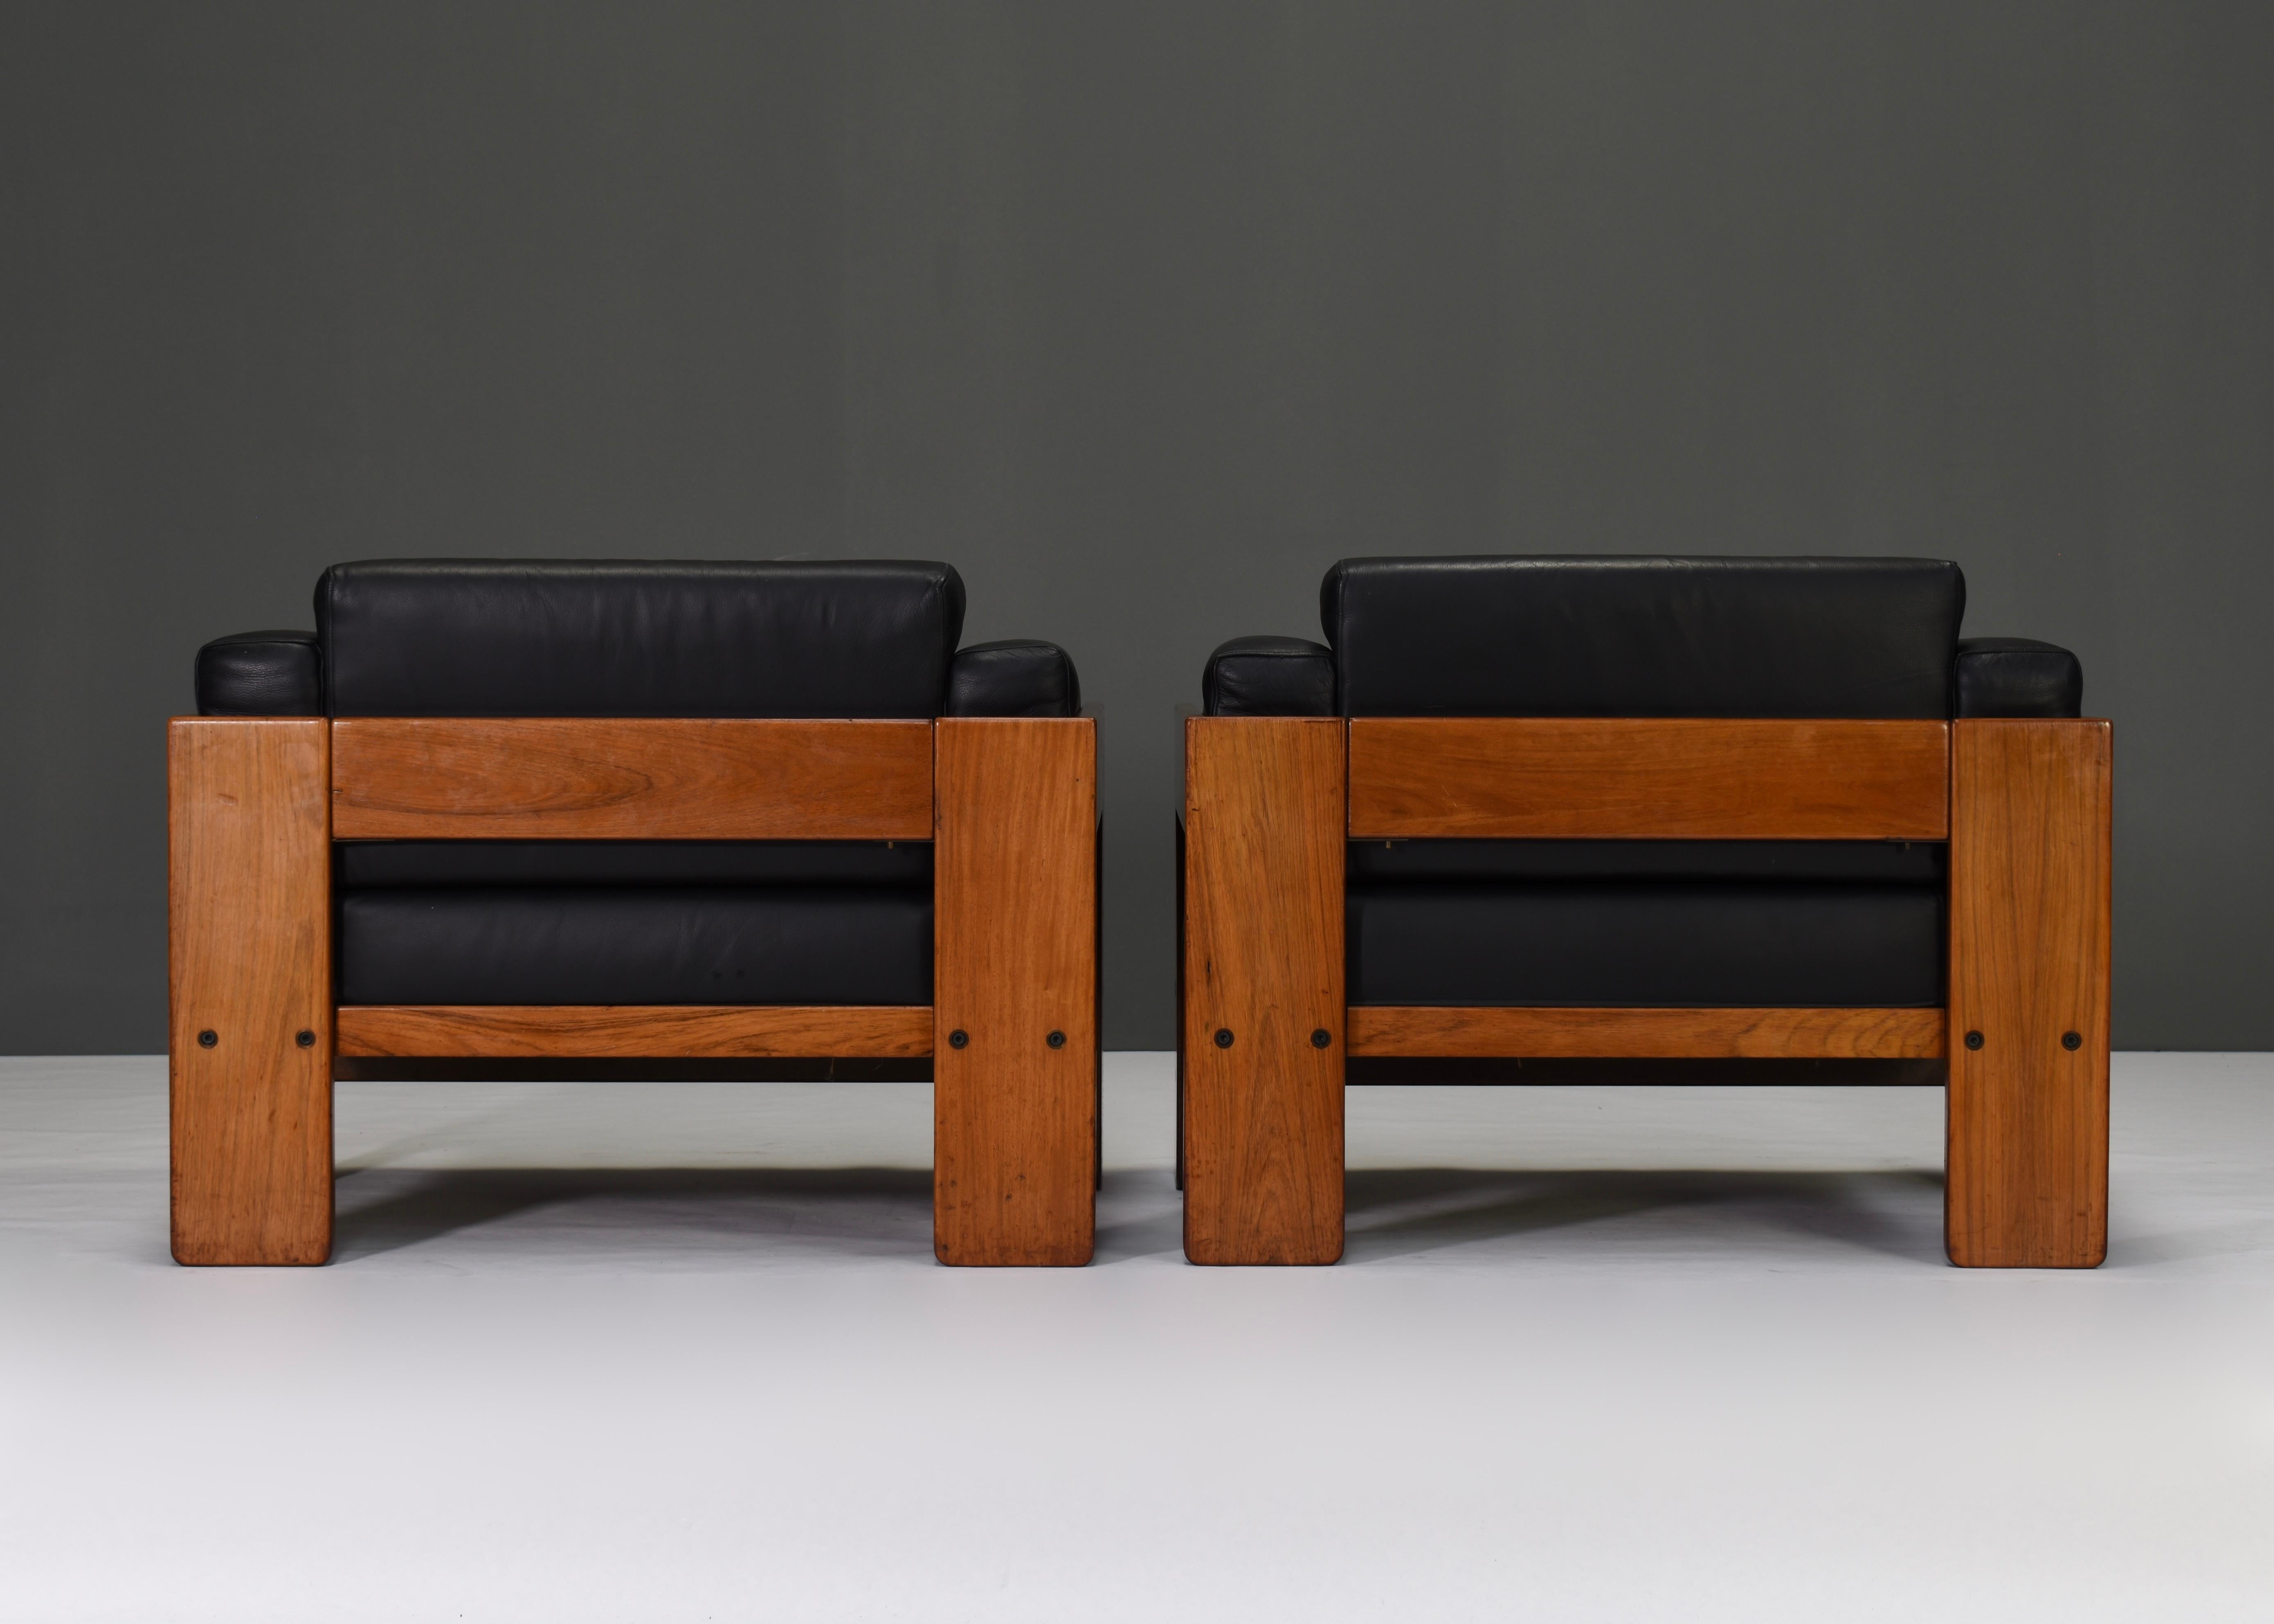 European Pair of Bastiano Chairs by Tobia Scarpa in Black Leather, Gavina, Italy, 1975